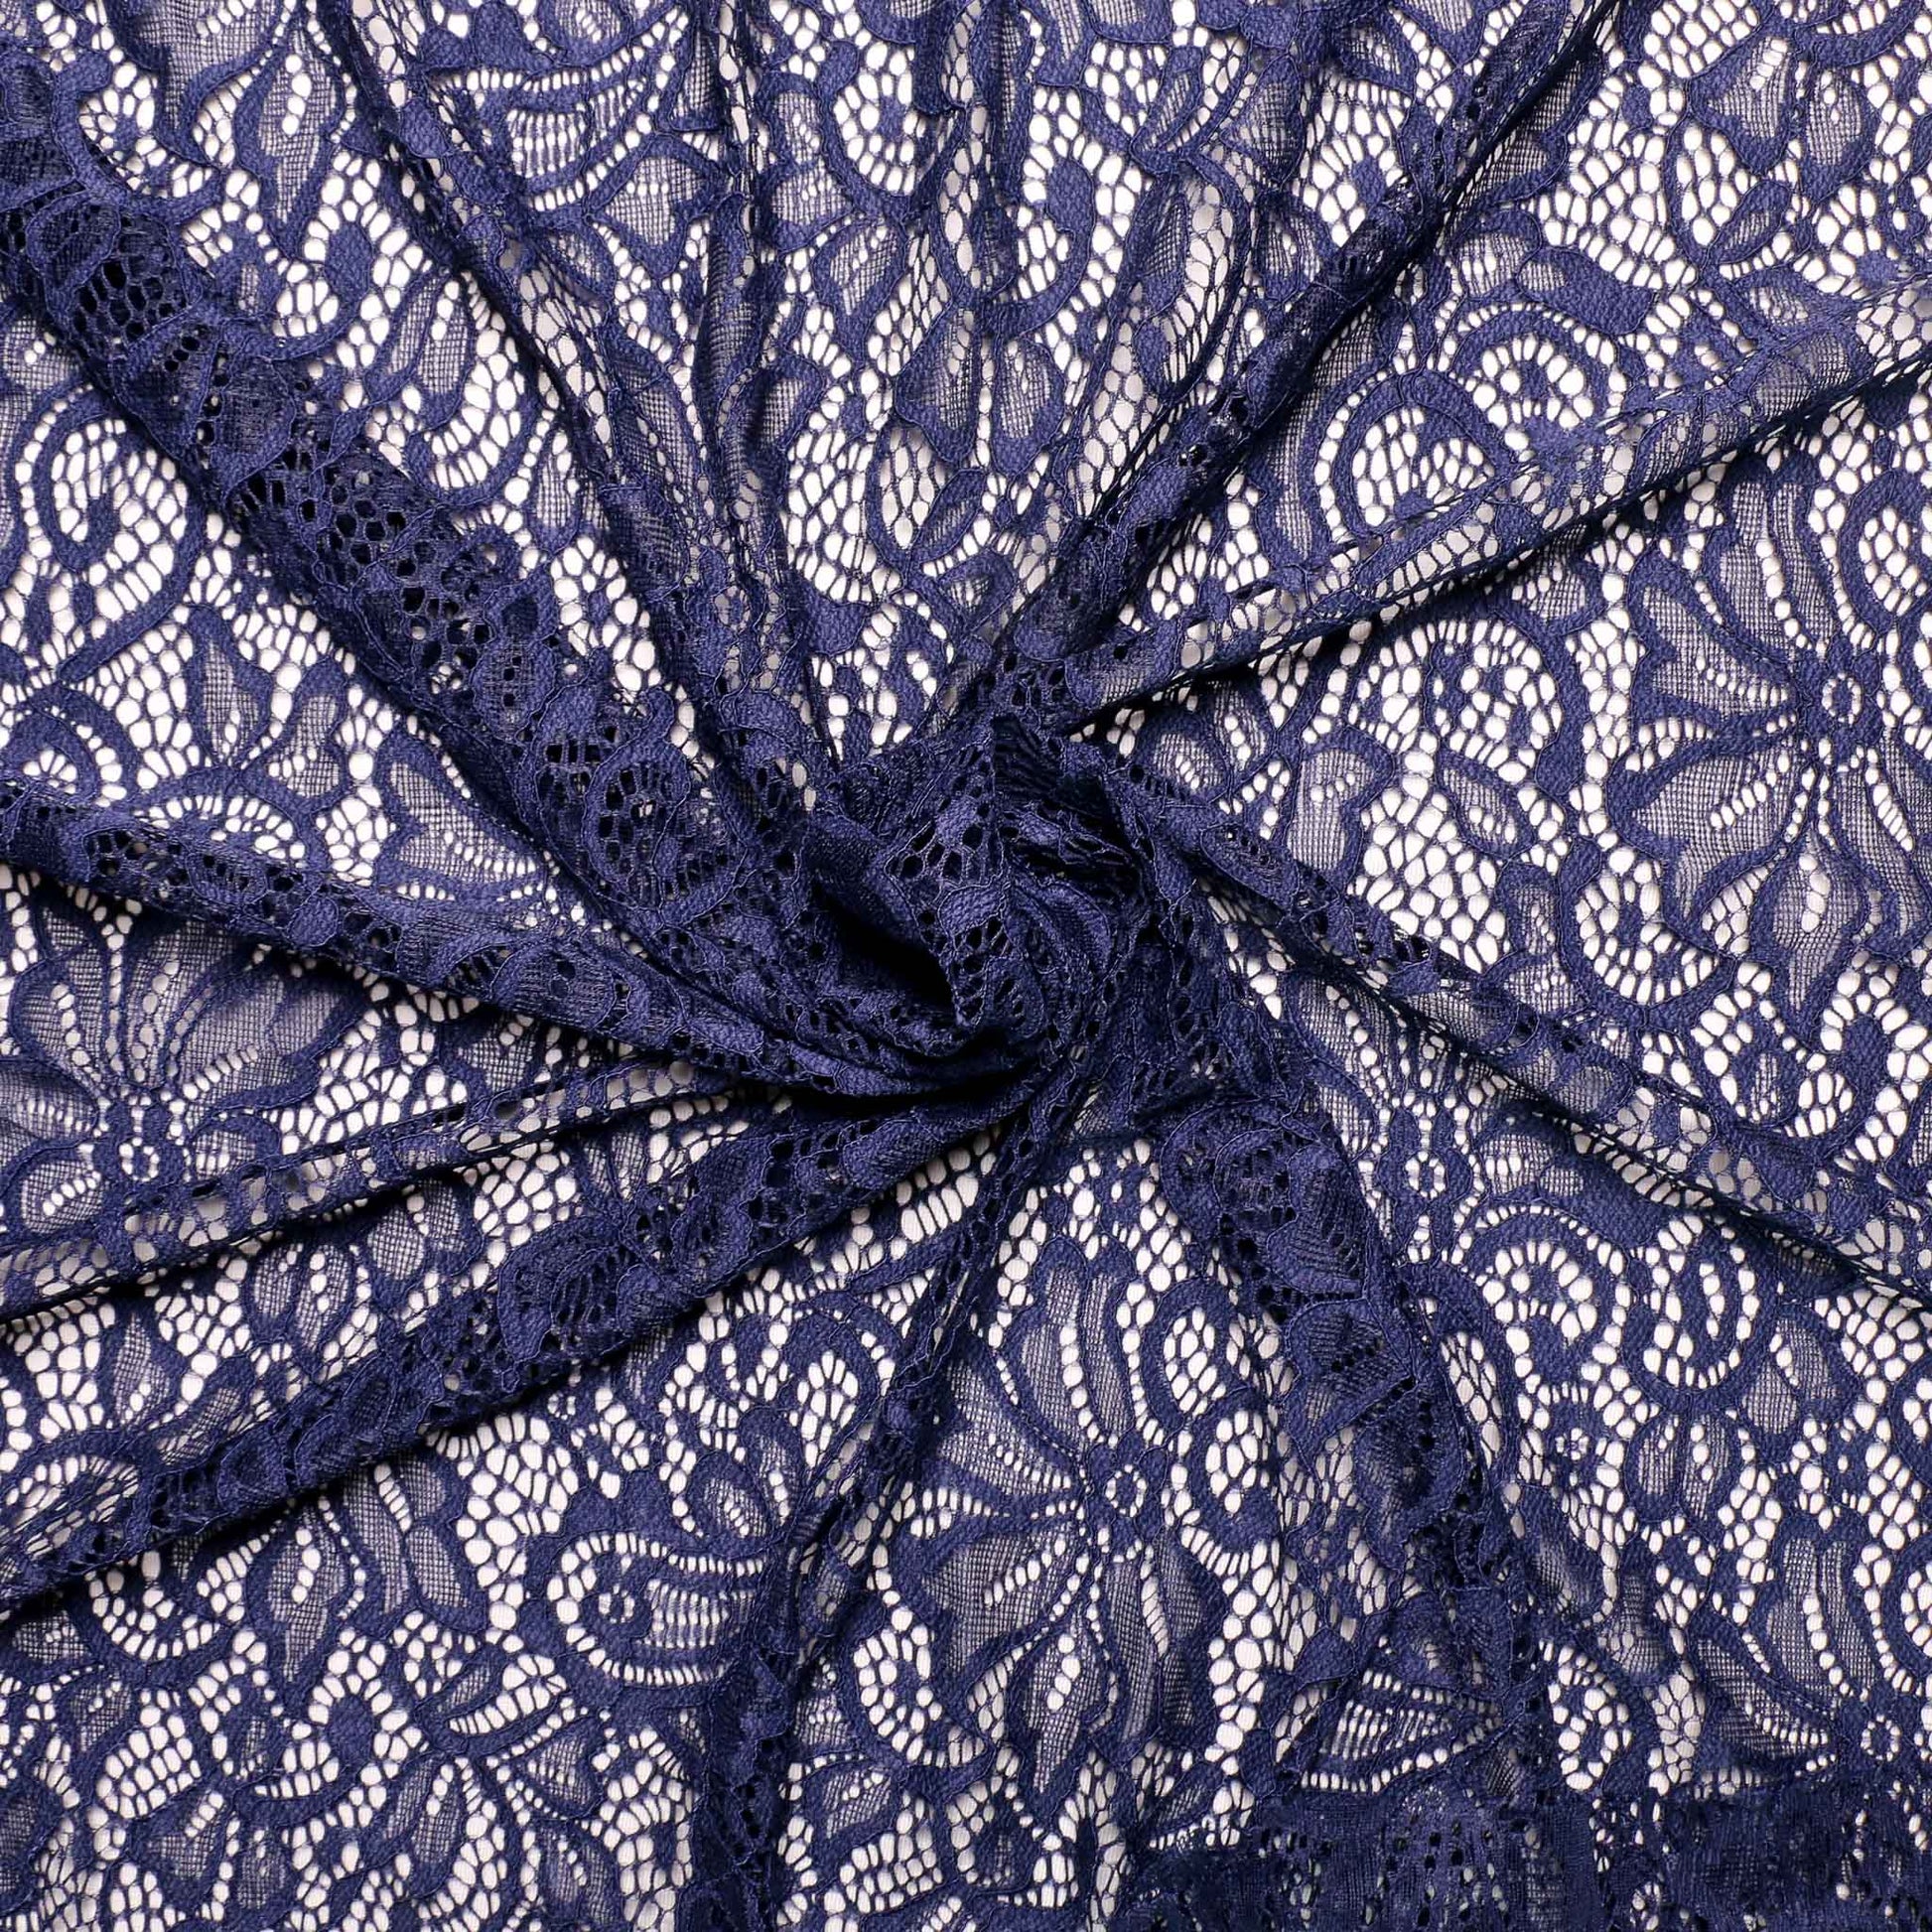 blue corded lace dressmaking fabric with scalloped edge